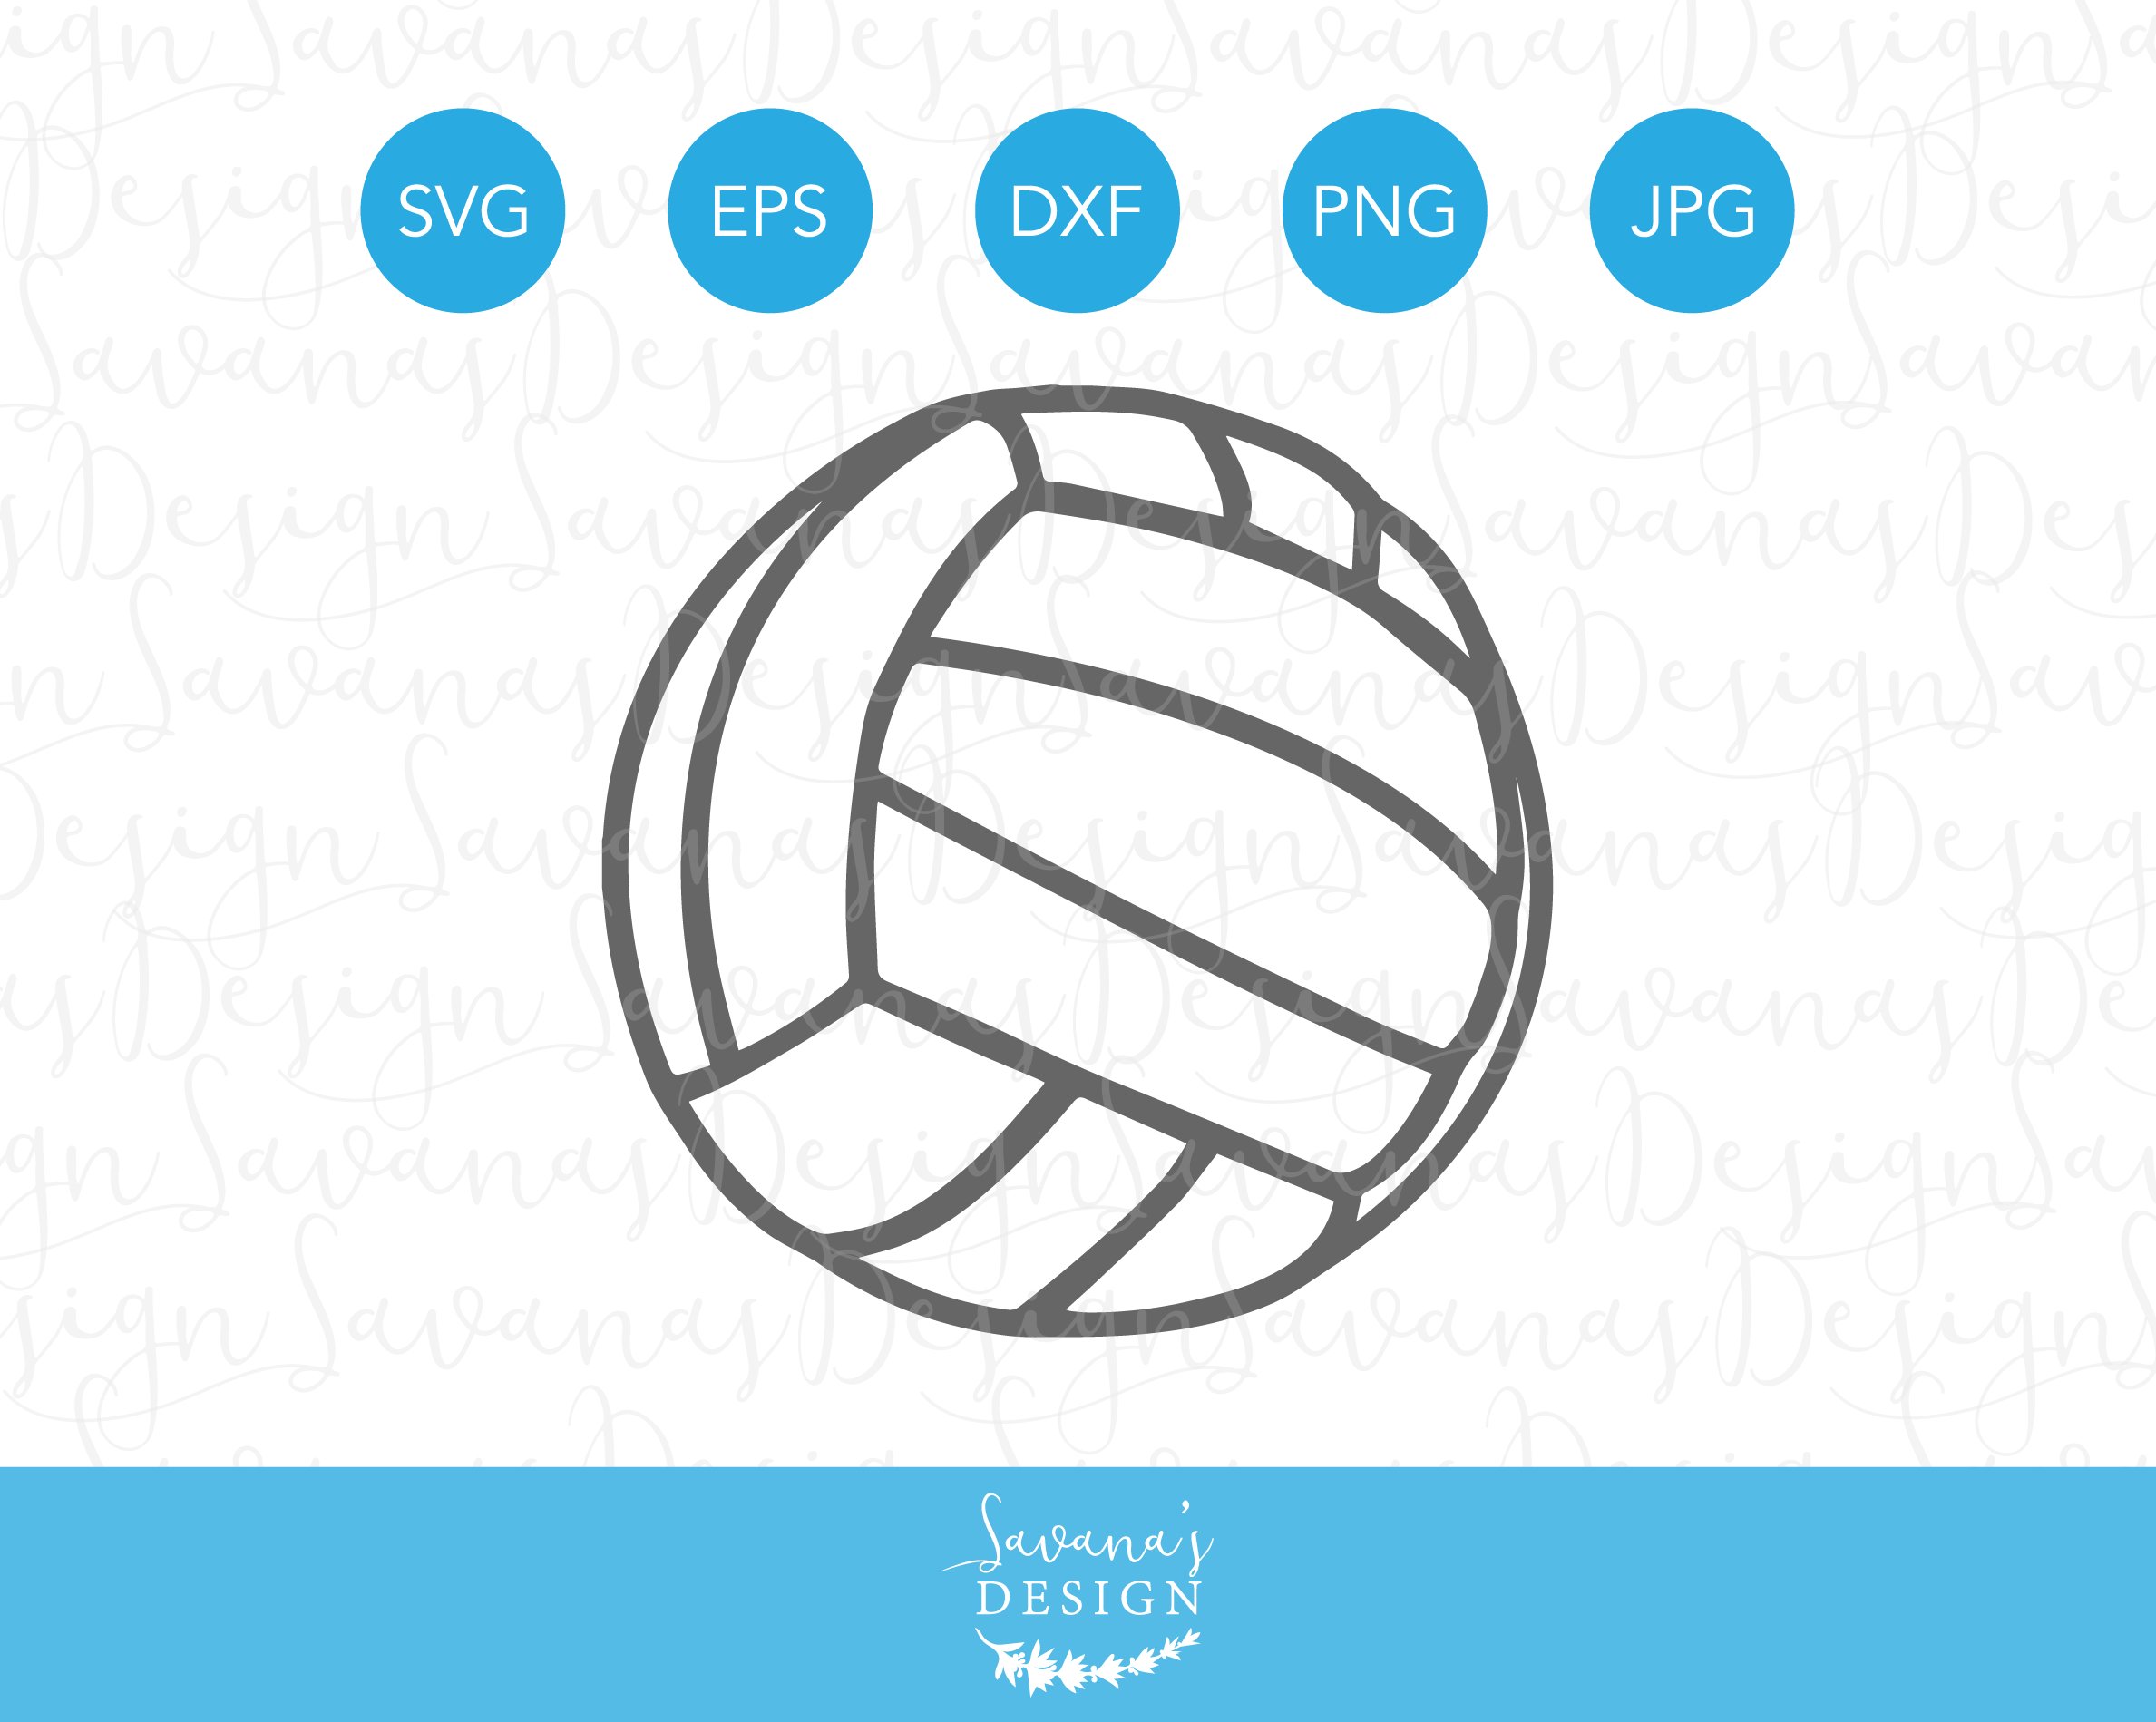 Volleyball SVG Cut File for Cricut cover image.